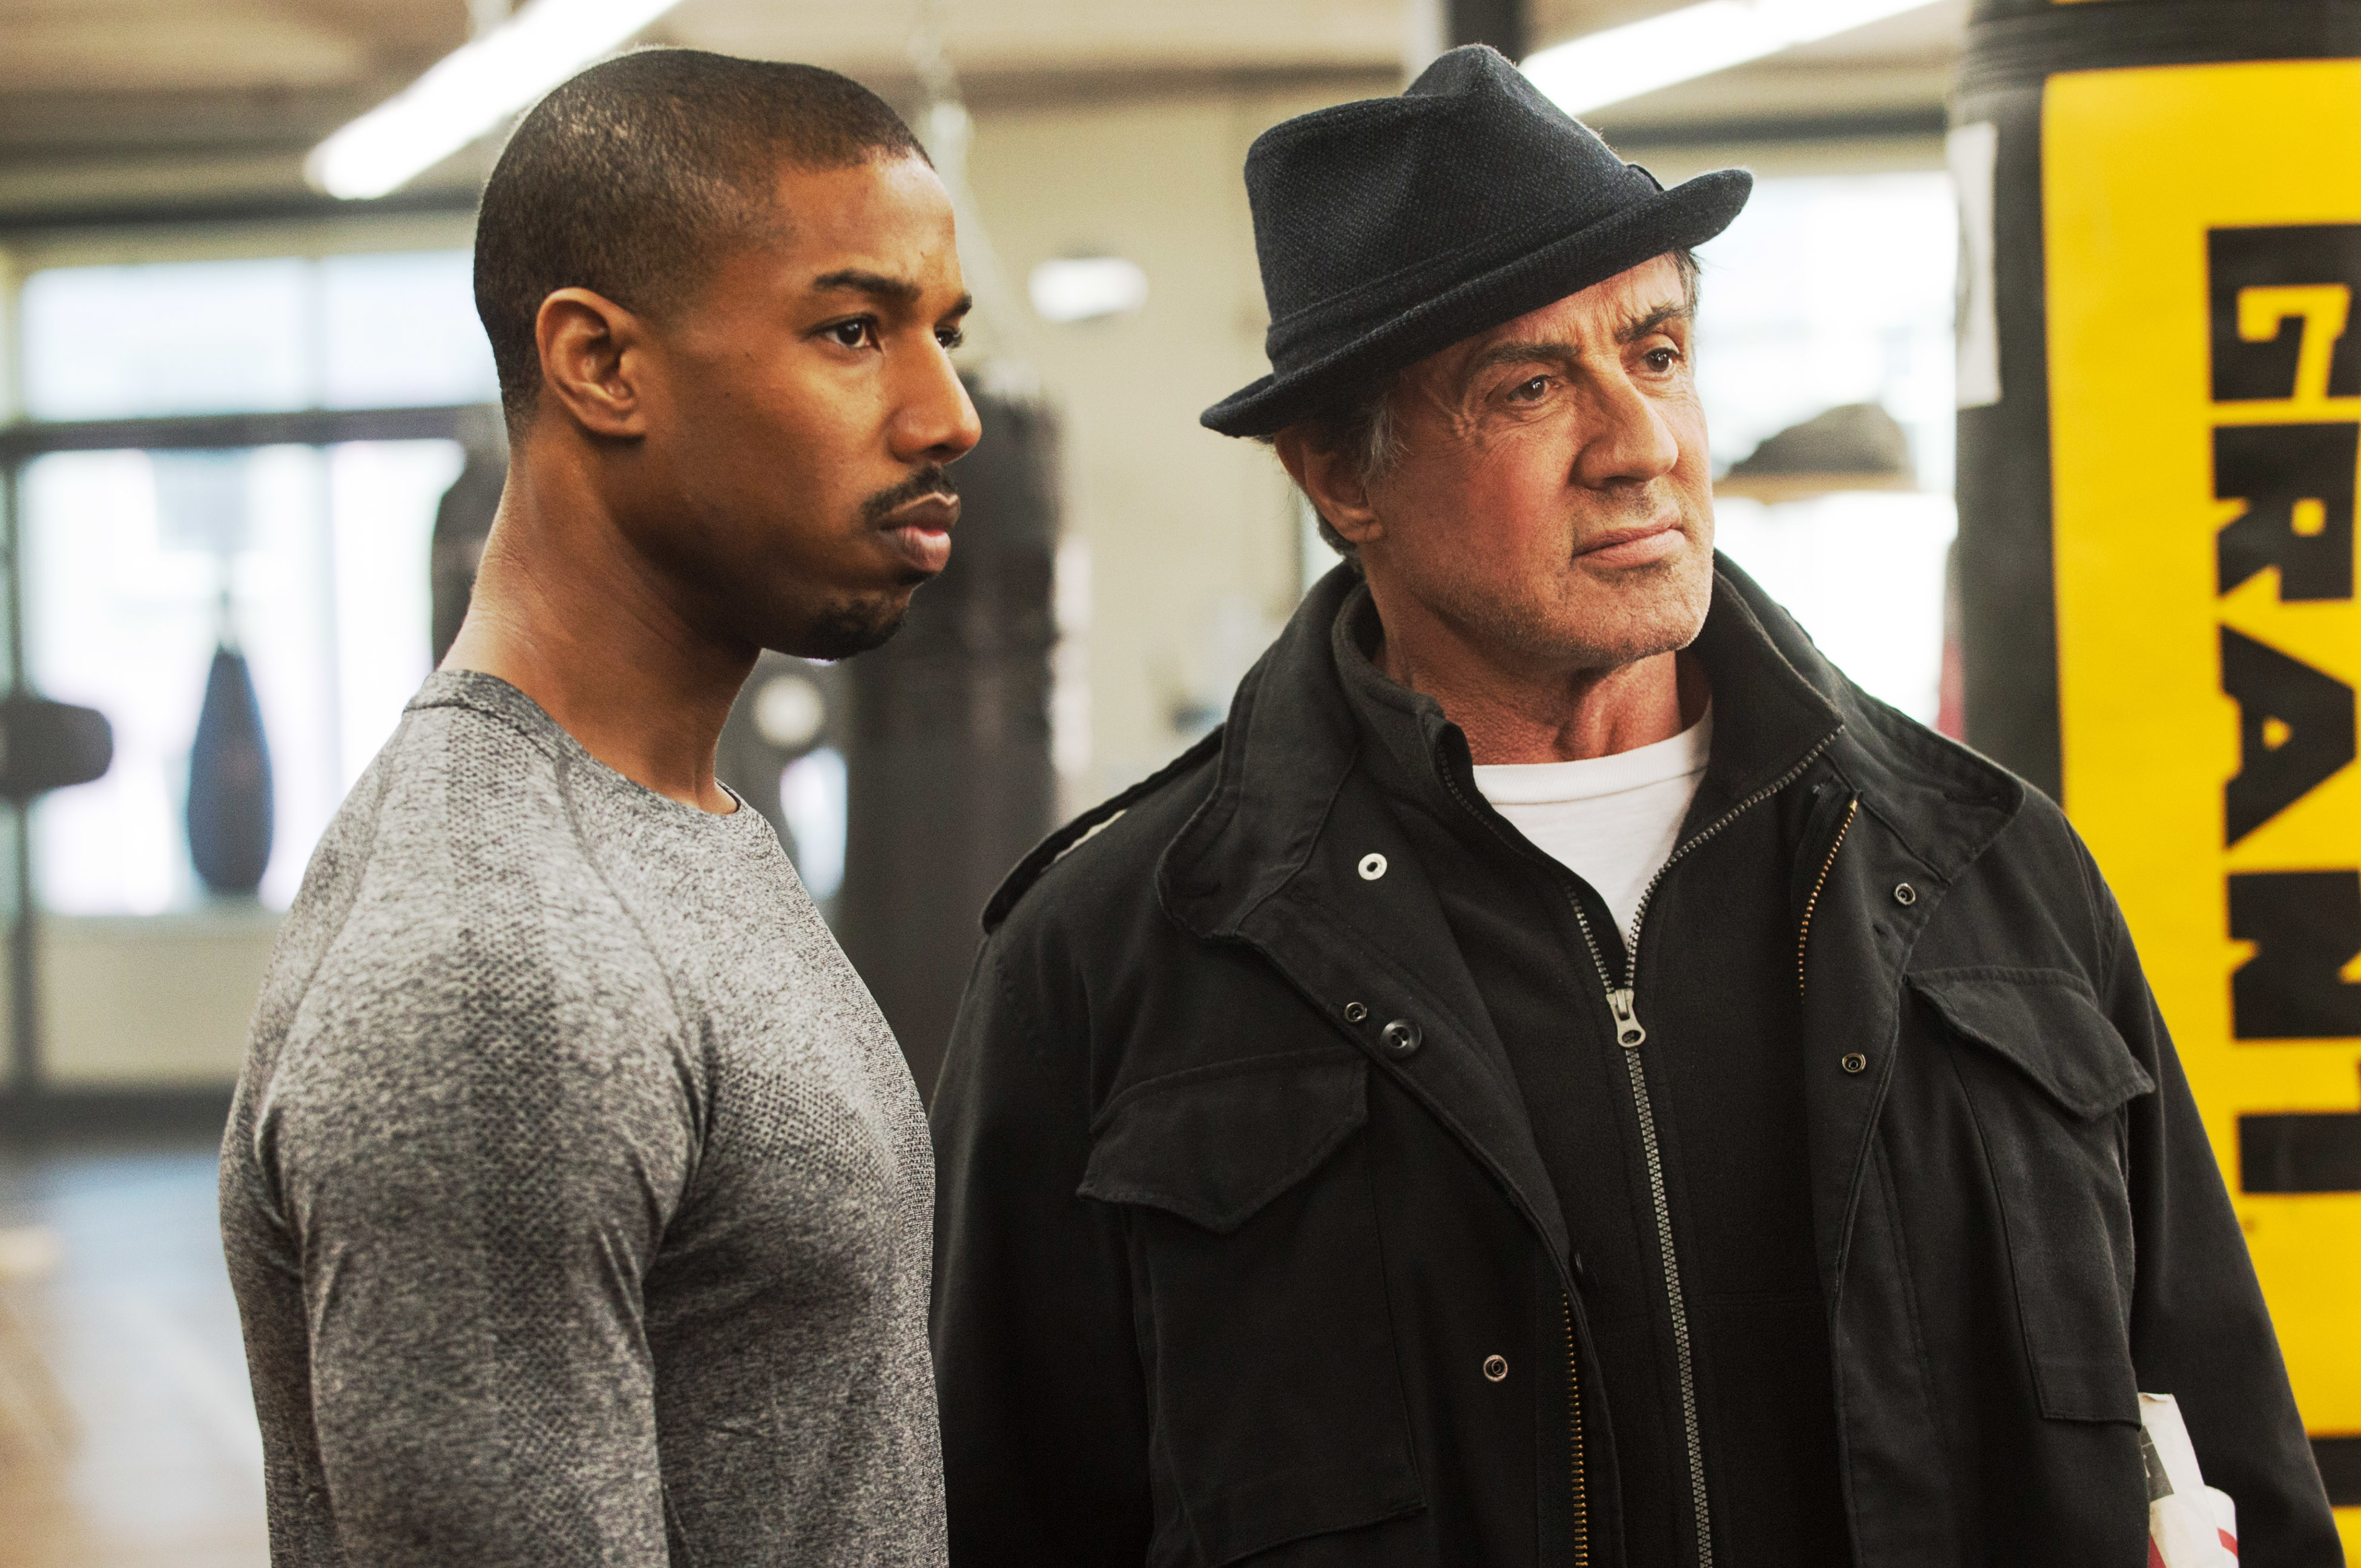 Michael B. Jordan and Sylvester Stallone in a boxing gym in a scene from Creed